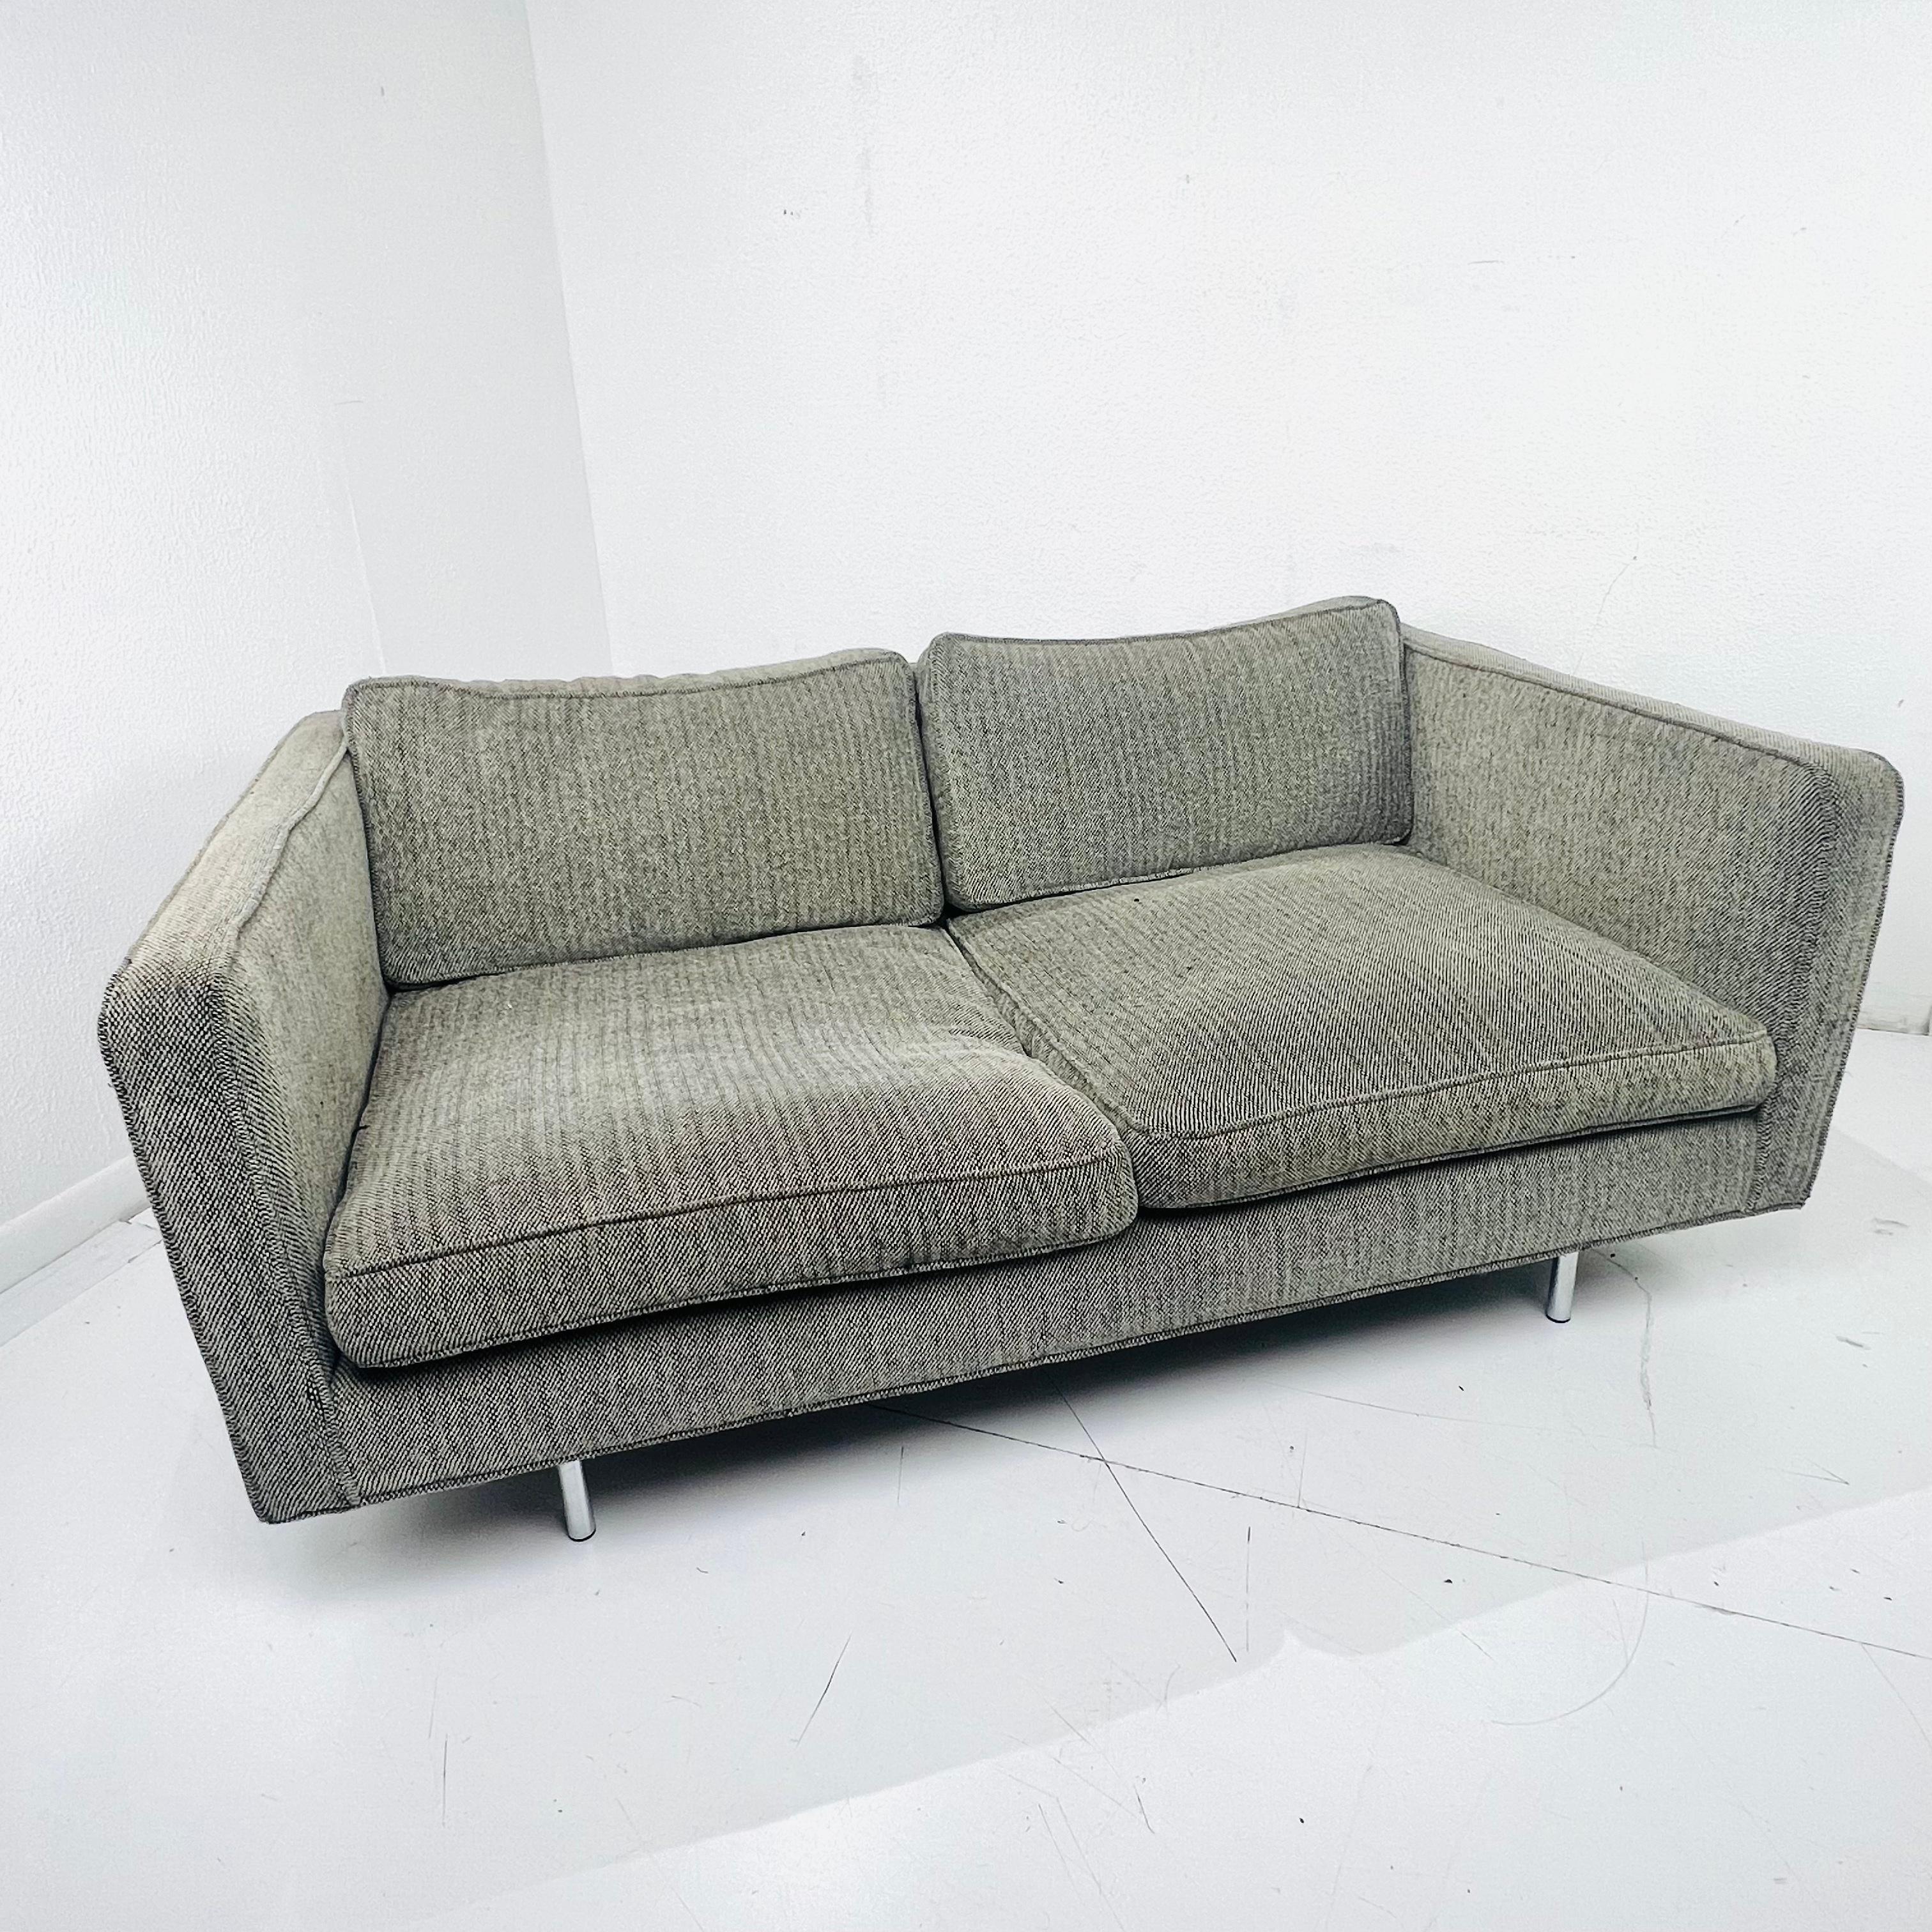 Knoll Two Seat Cube Sofa In Good Condition For Sale In Dallas, TX